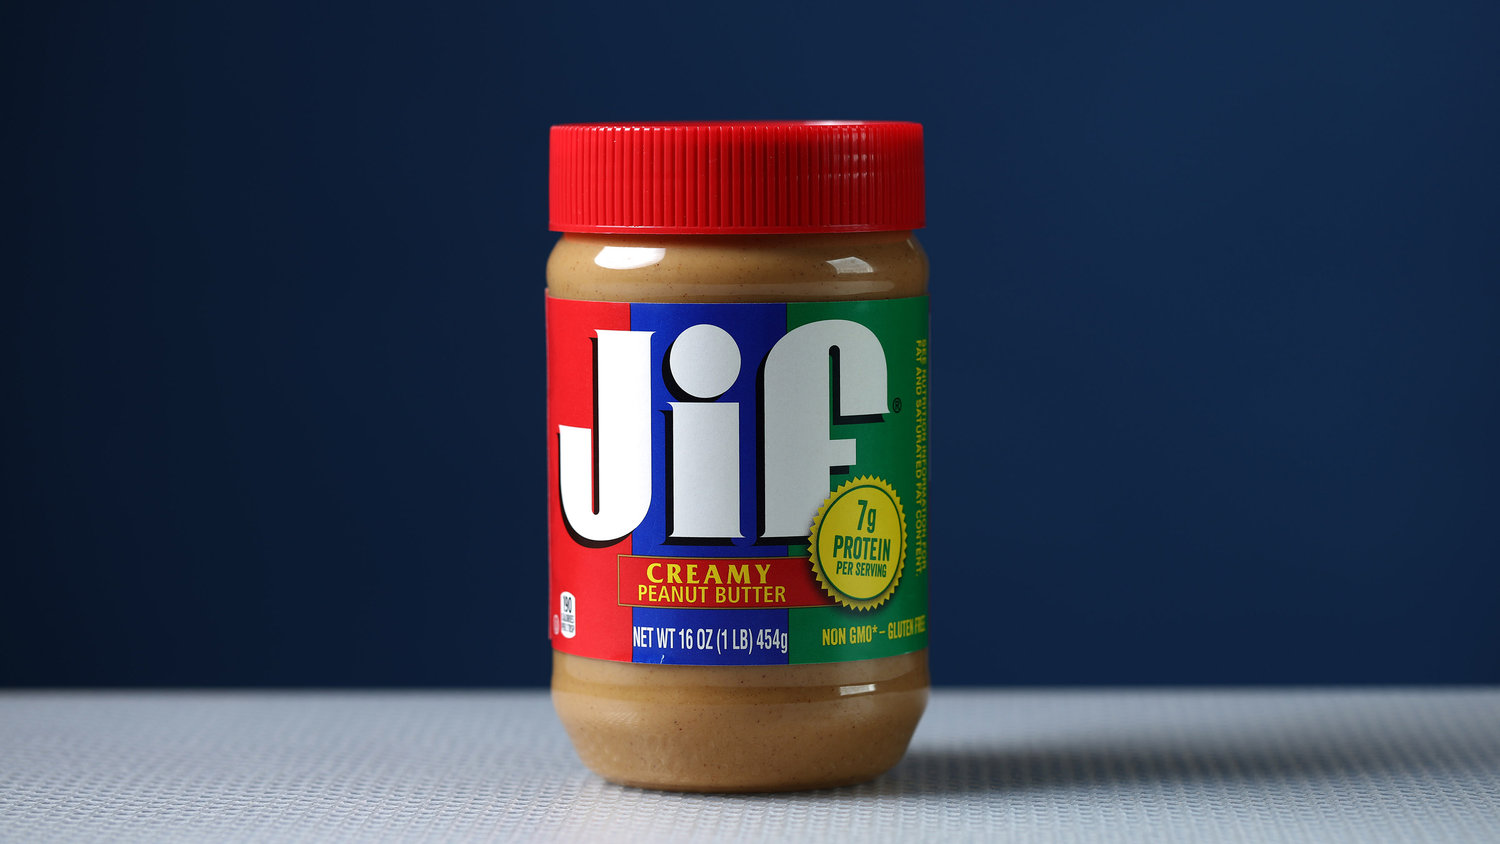 The J.M. Smucker Company has voluntarily recalled certain Jif brand peanut butter products, a staple in many households, that have the lot code numbers between 1274425 to 2140425, which were manufactured in Lexington, Kentucky, due to possible salmonella contamination. (Abel Uribe/Chicago Tribune/TNS)